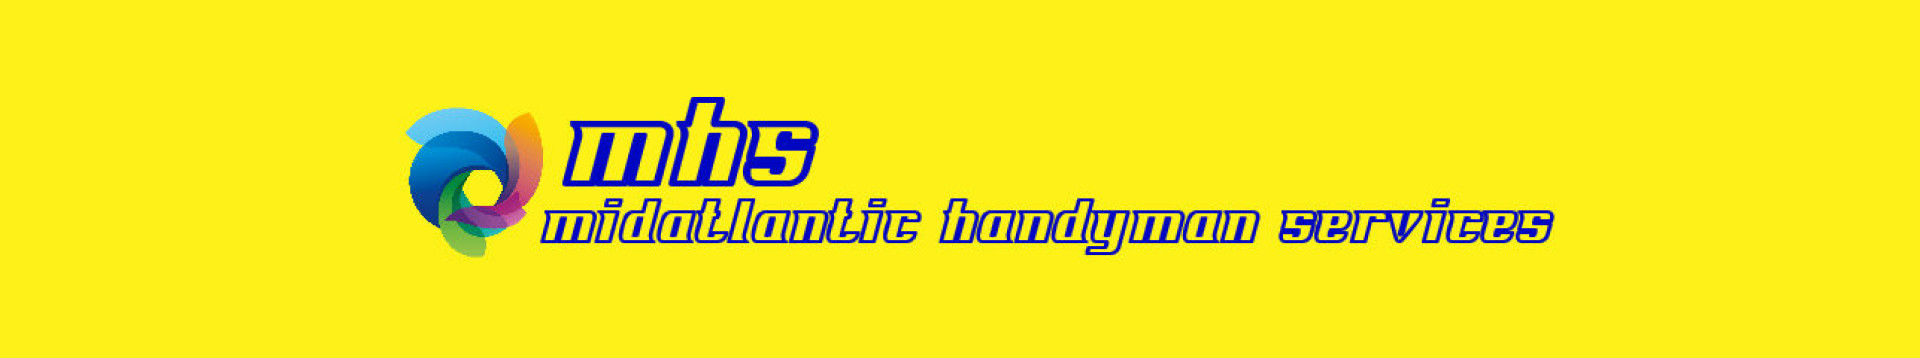 Dependable handyman services in Rockville, MD, 20853!